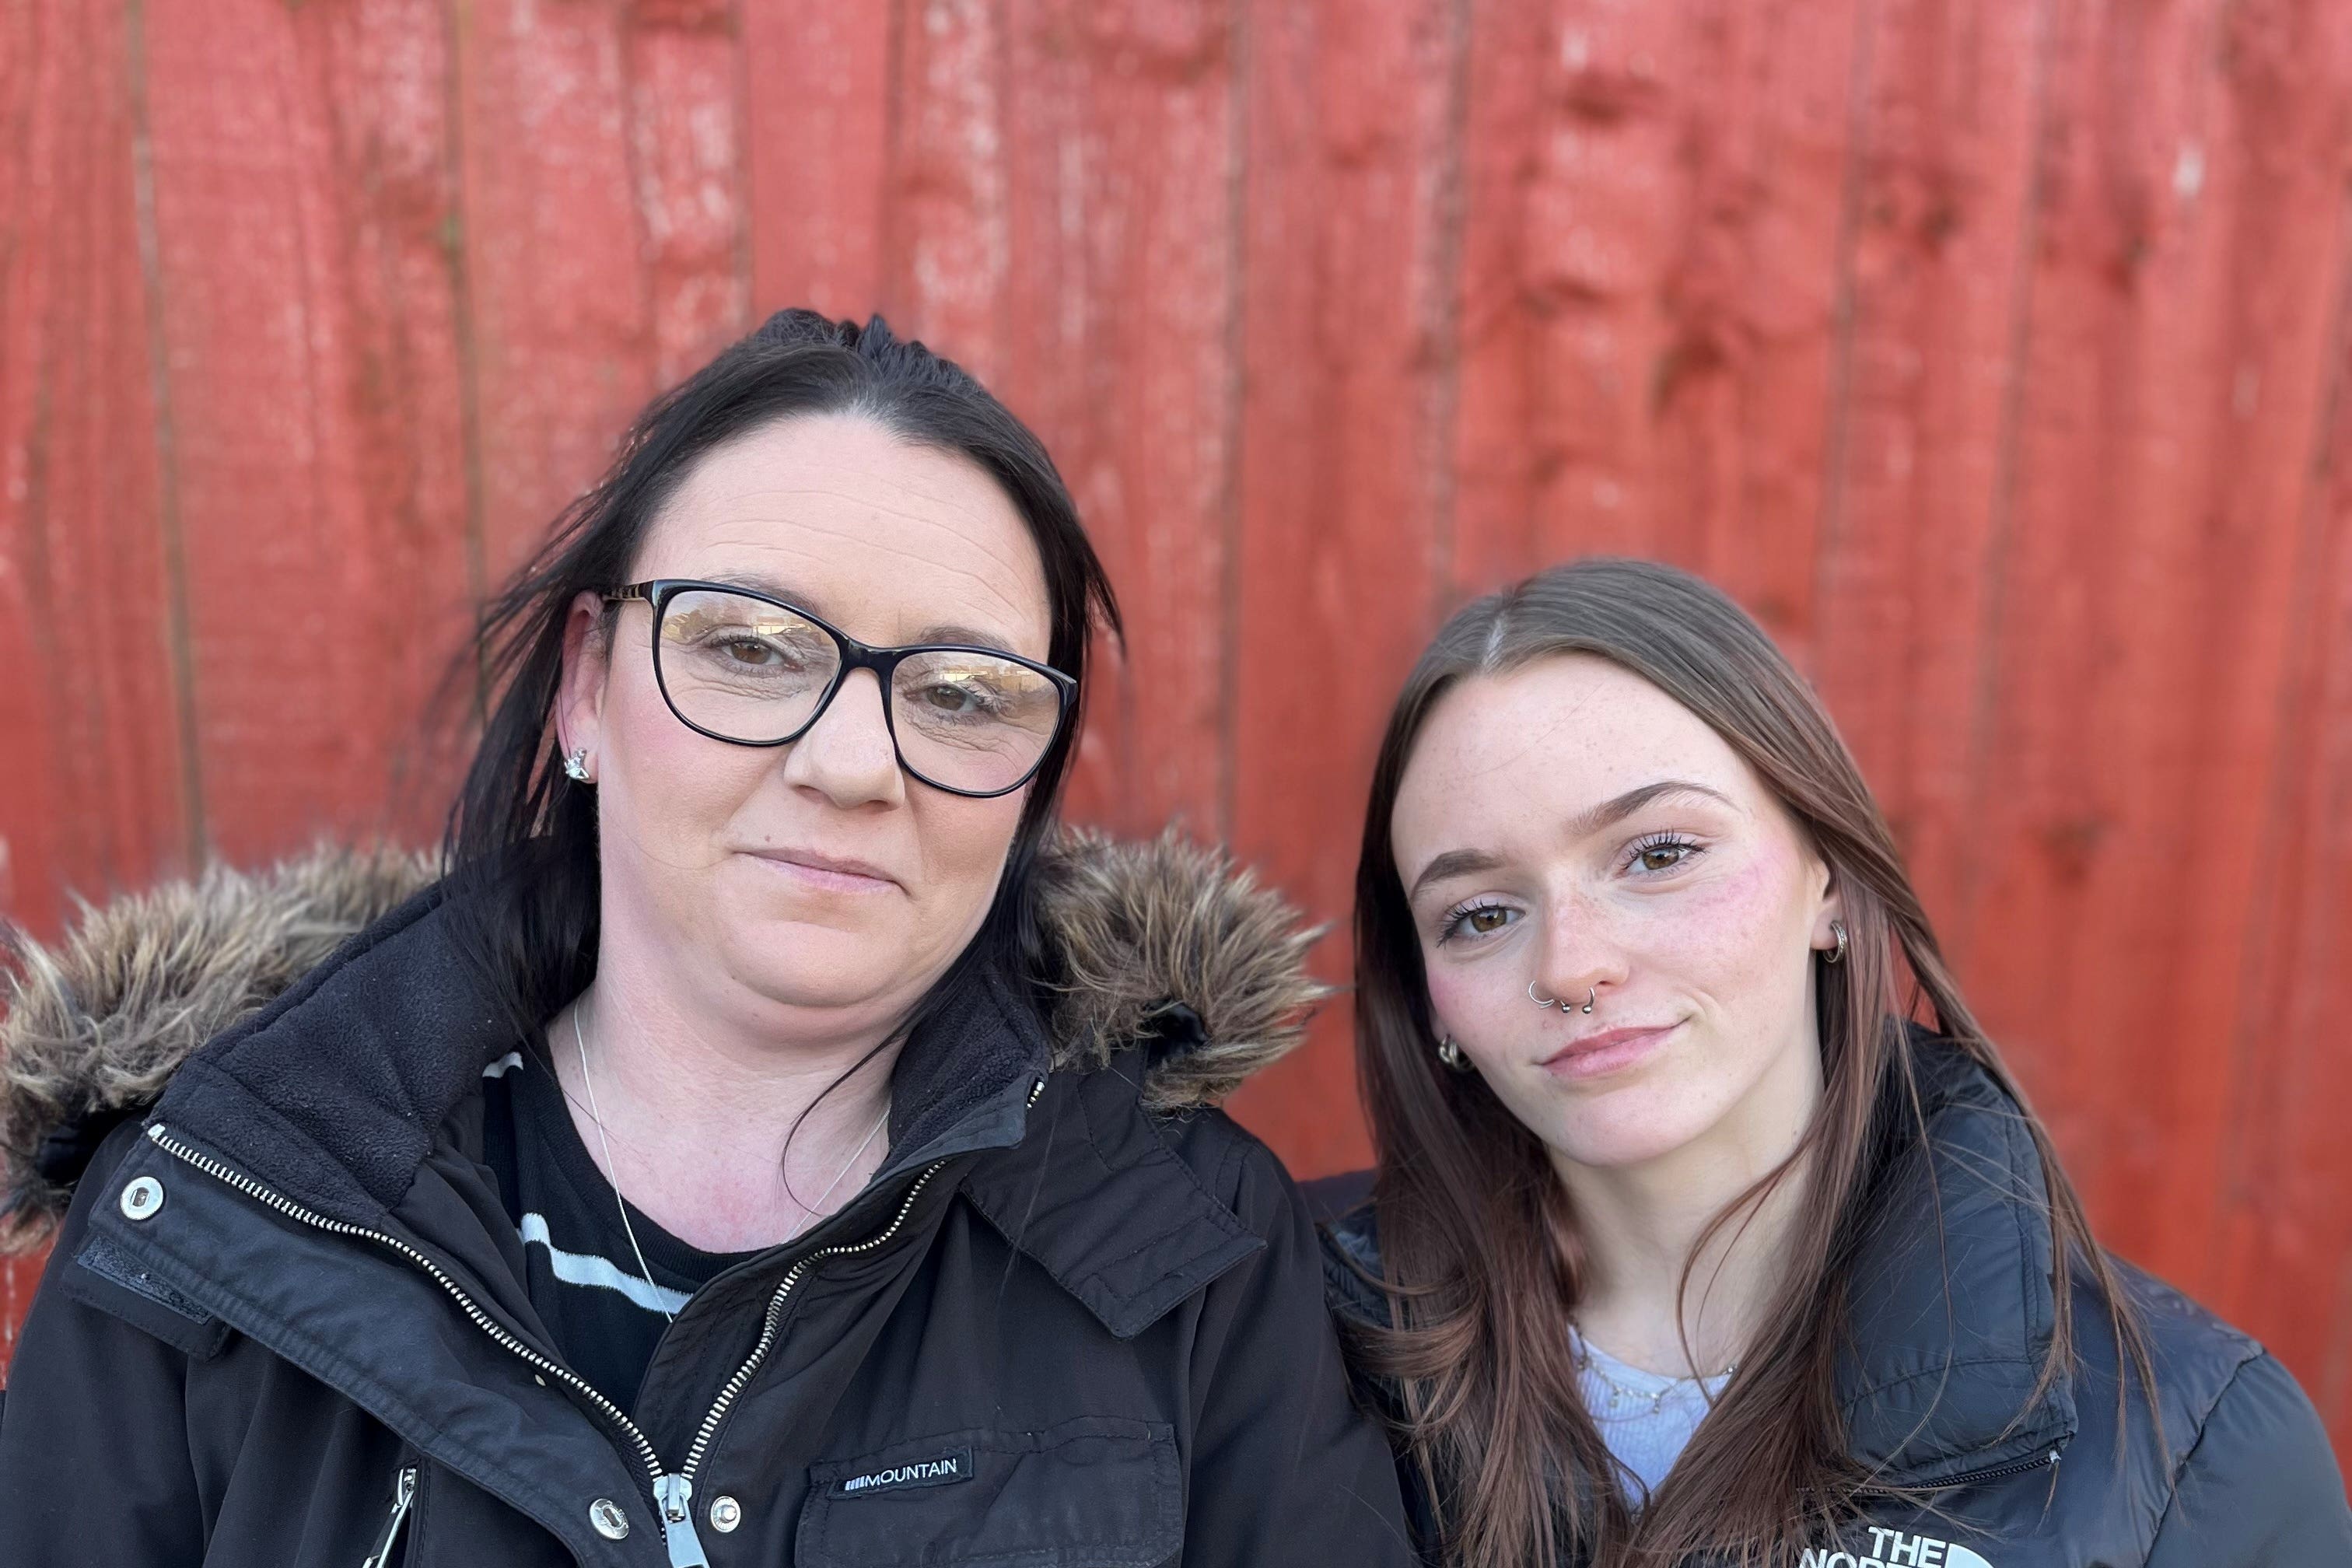 Post Office clerk Jacqueline Falcon (left), whose fraud conviction has been overturned by the Court of Appeal in the light of the Horizon system debacle, pictured with her 17-year-old daughter Summer, near their home in Hadston, Northumberland (Tom Wilkinson/PA)